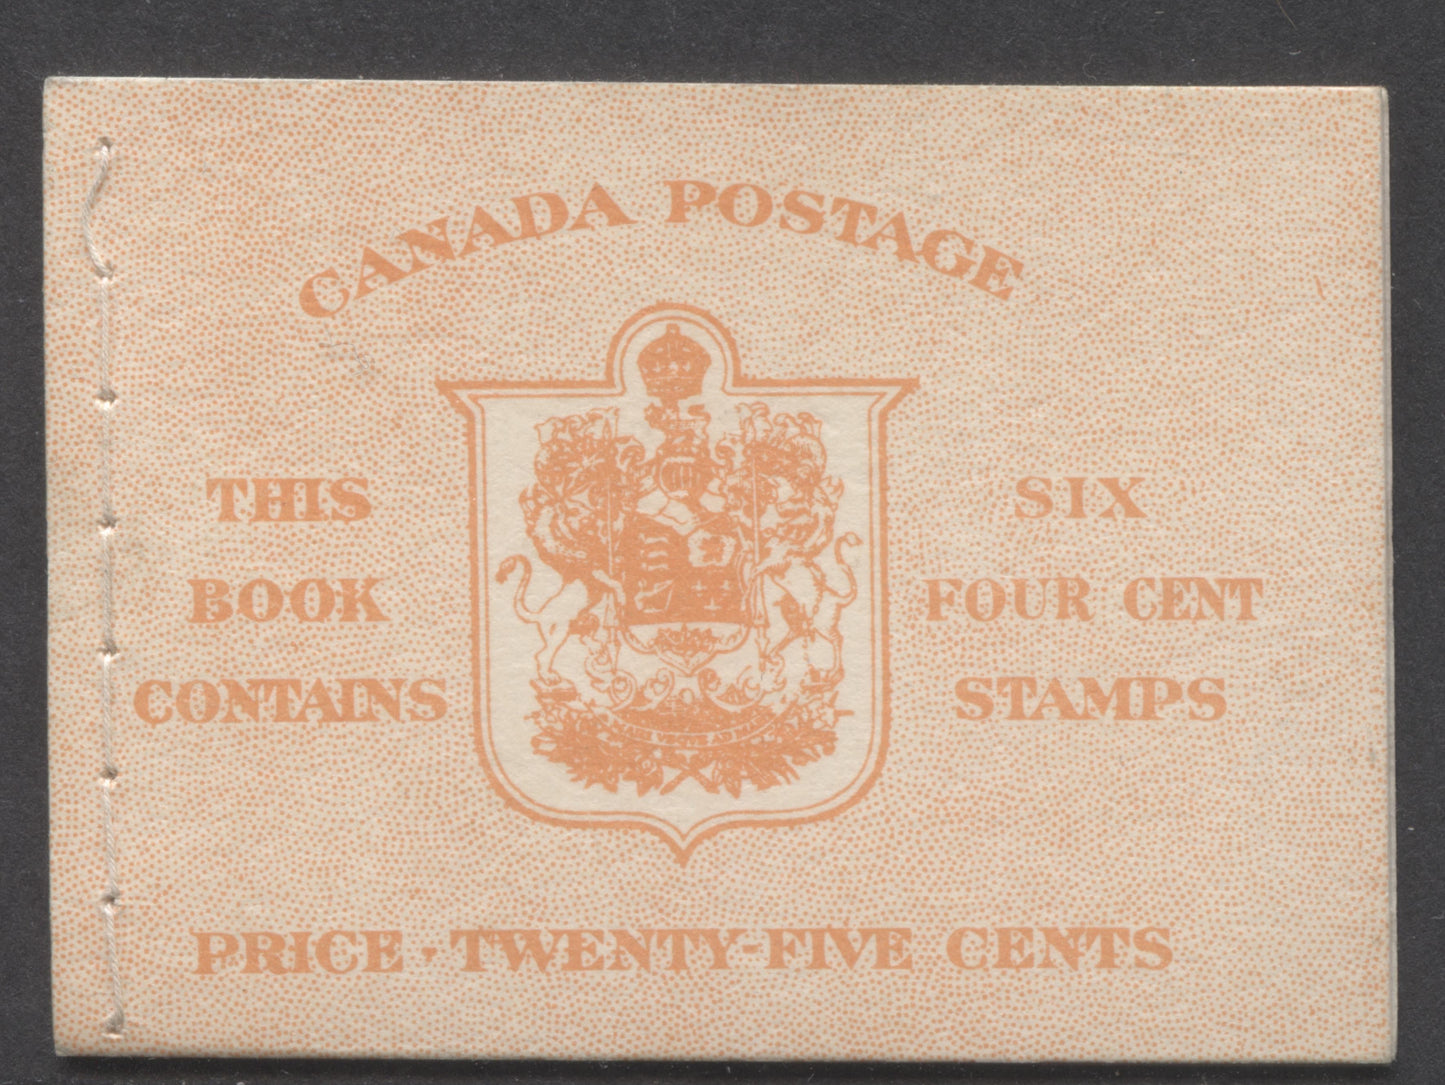 Lot 97 Canada #BK41cE 1949-1951 KGVI Issue, A Complete 25c English Booklet With 4c Dark Carmine, Pane Of 6. Front Cover IIi, Back Cover Ei, Type II Stitched Cover, No Rate Page, 250,000 Issued